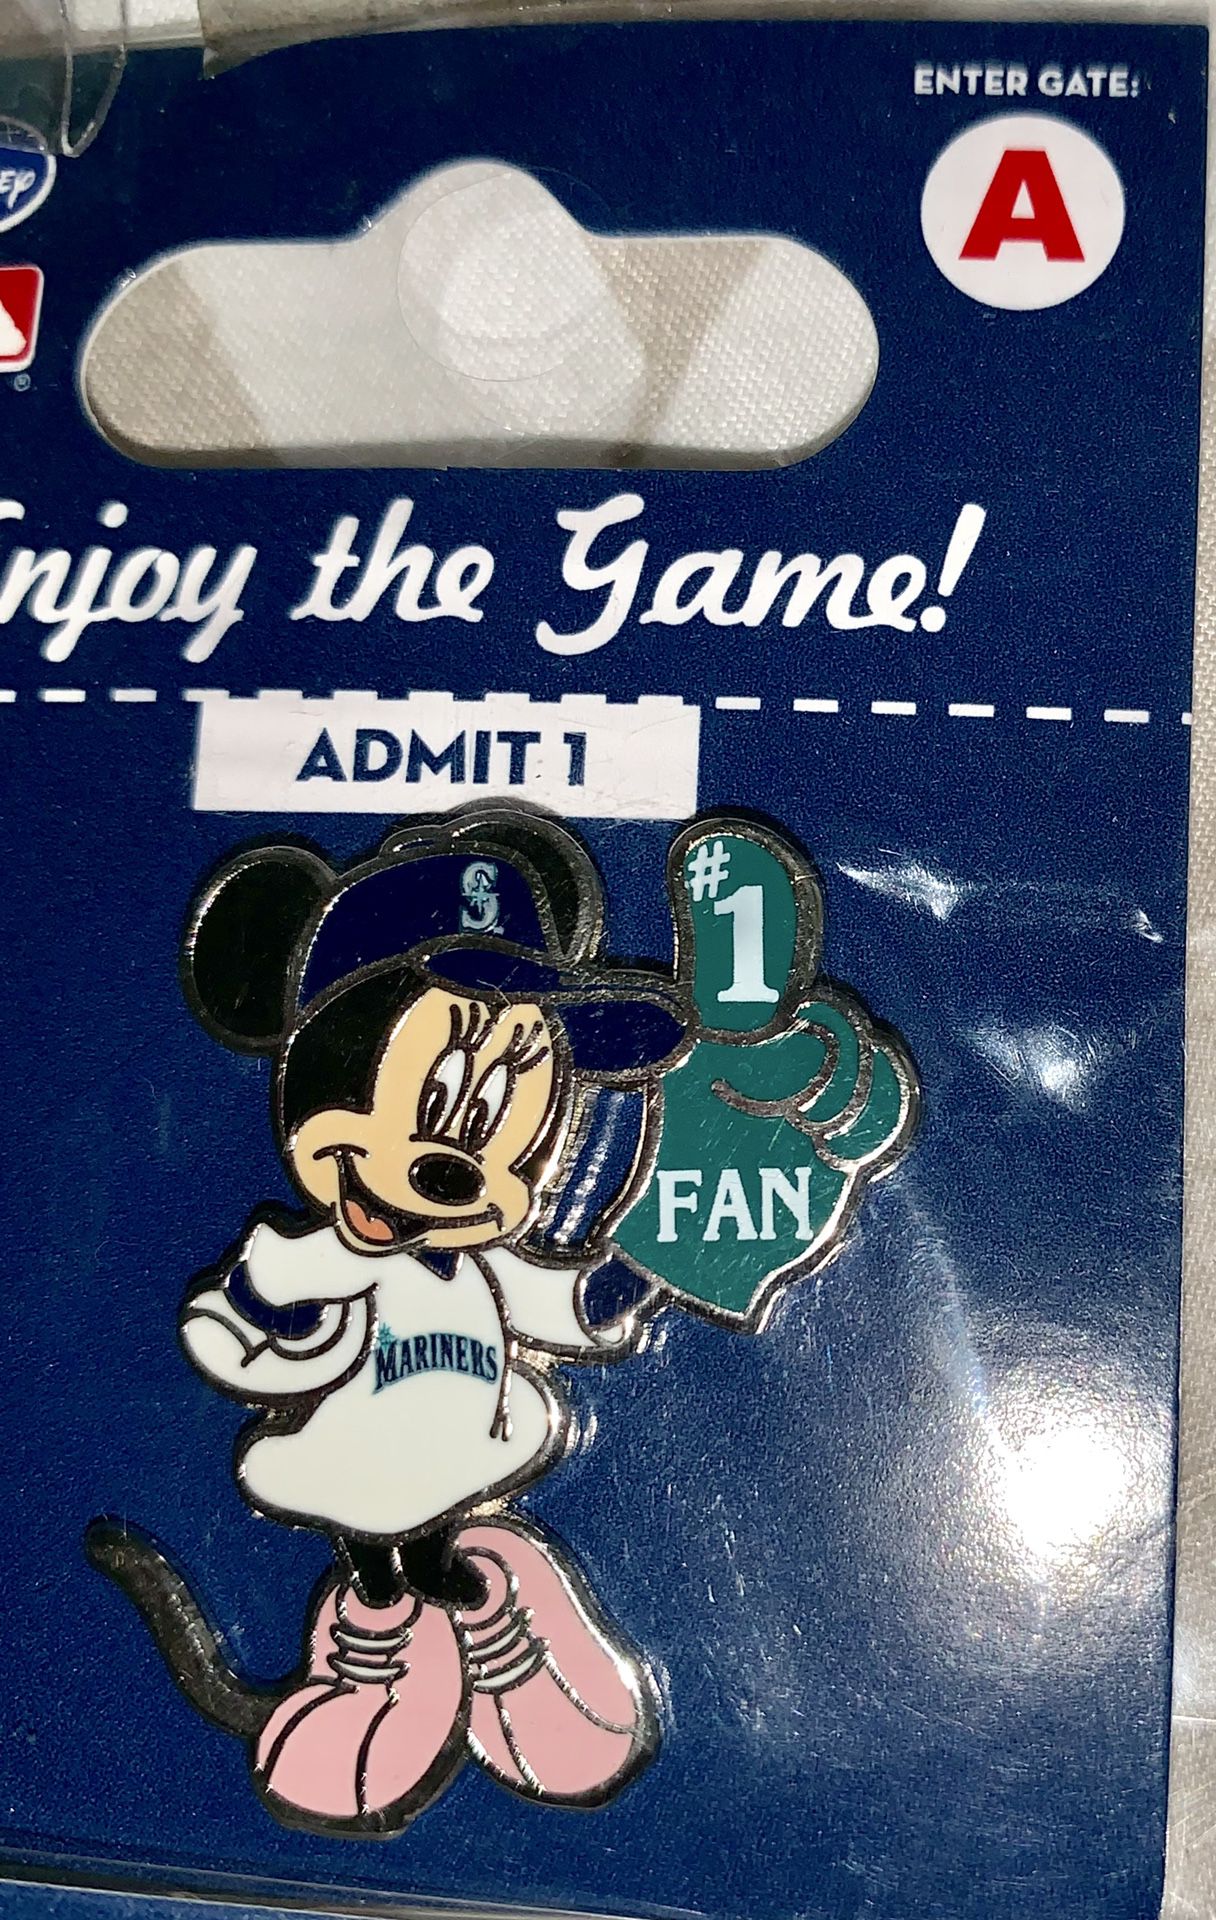 New Disney’s Mariner’s Minnie Mouse pin